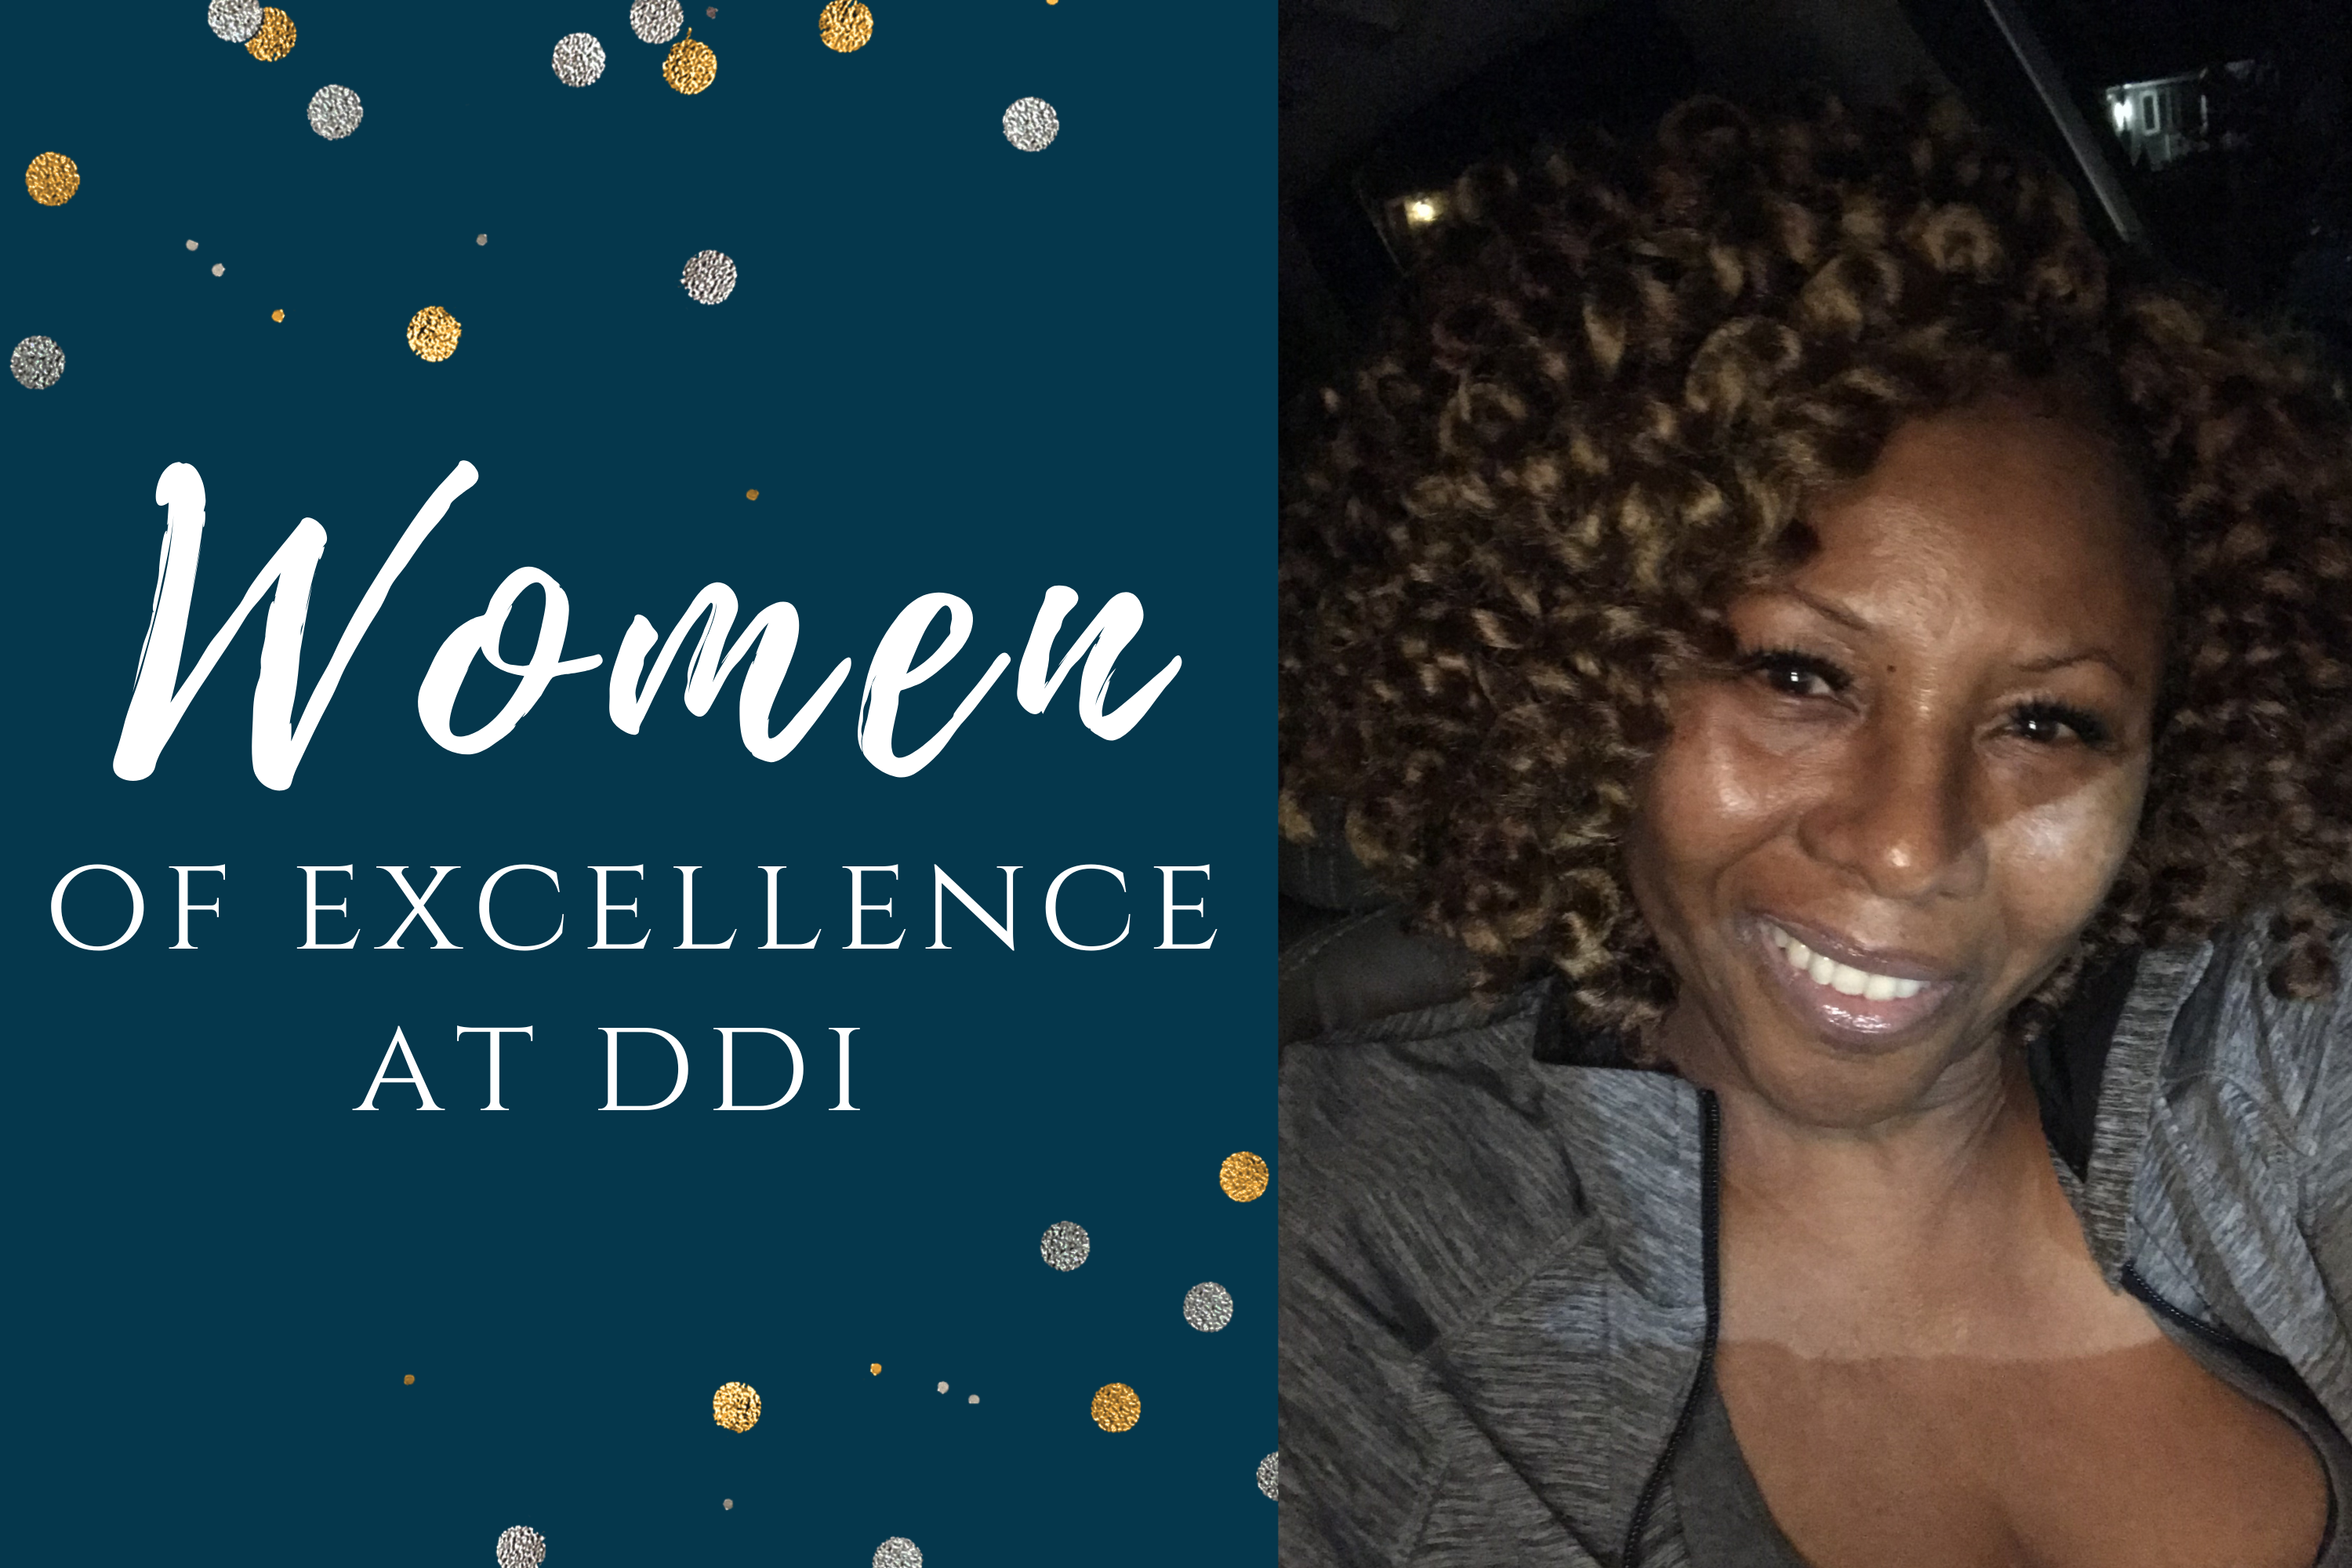 Women of Excellence at DDI-Angela Sandy